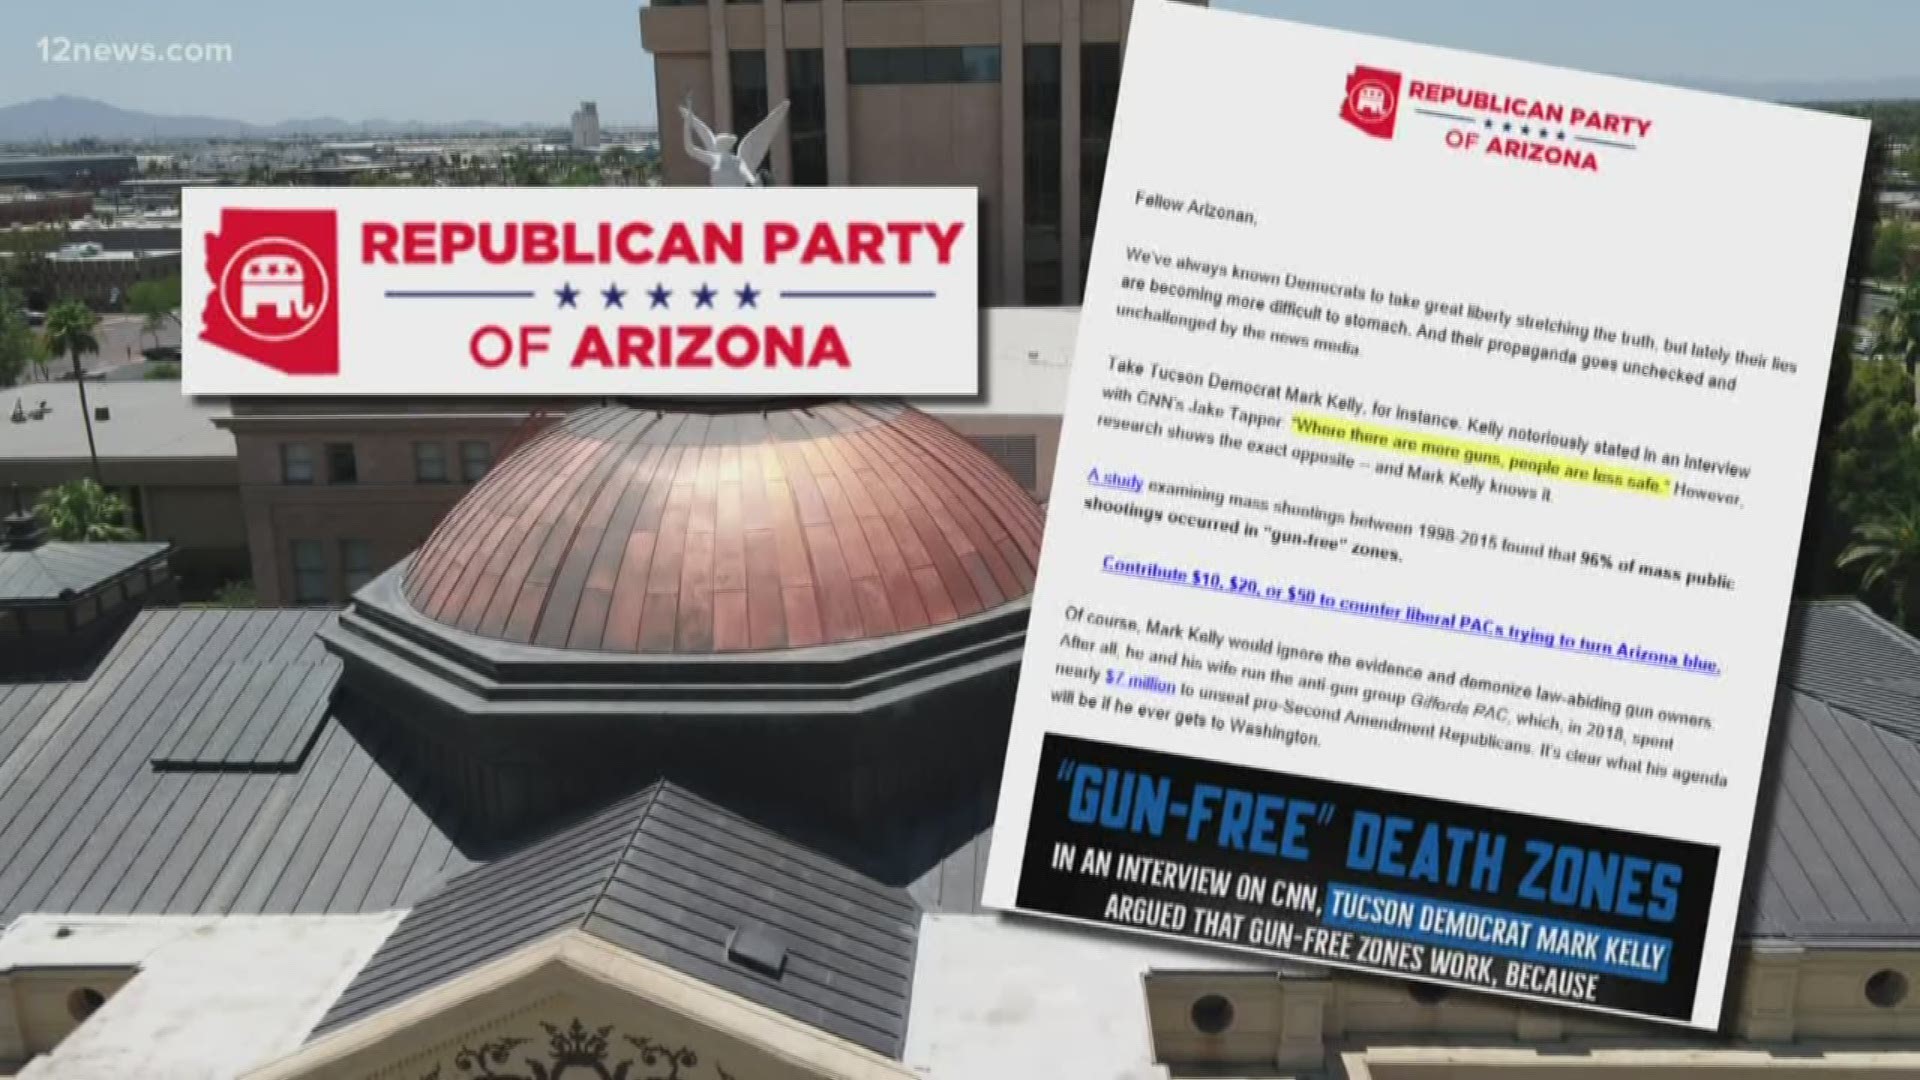 Arizona Republican Party chair Kelli Ward is getting backlash after sending a fundraising email asking people to support the party and "stop gun-grabber Mark Kelly dead in his tracks." Team 12's Bianca Buono has the latest.